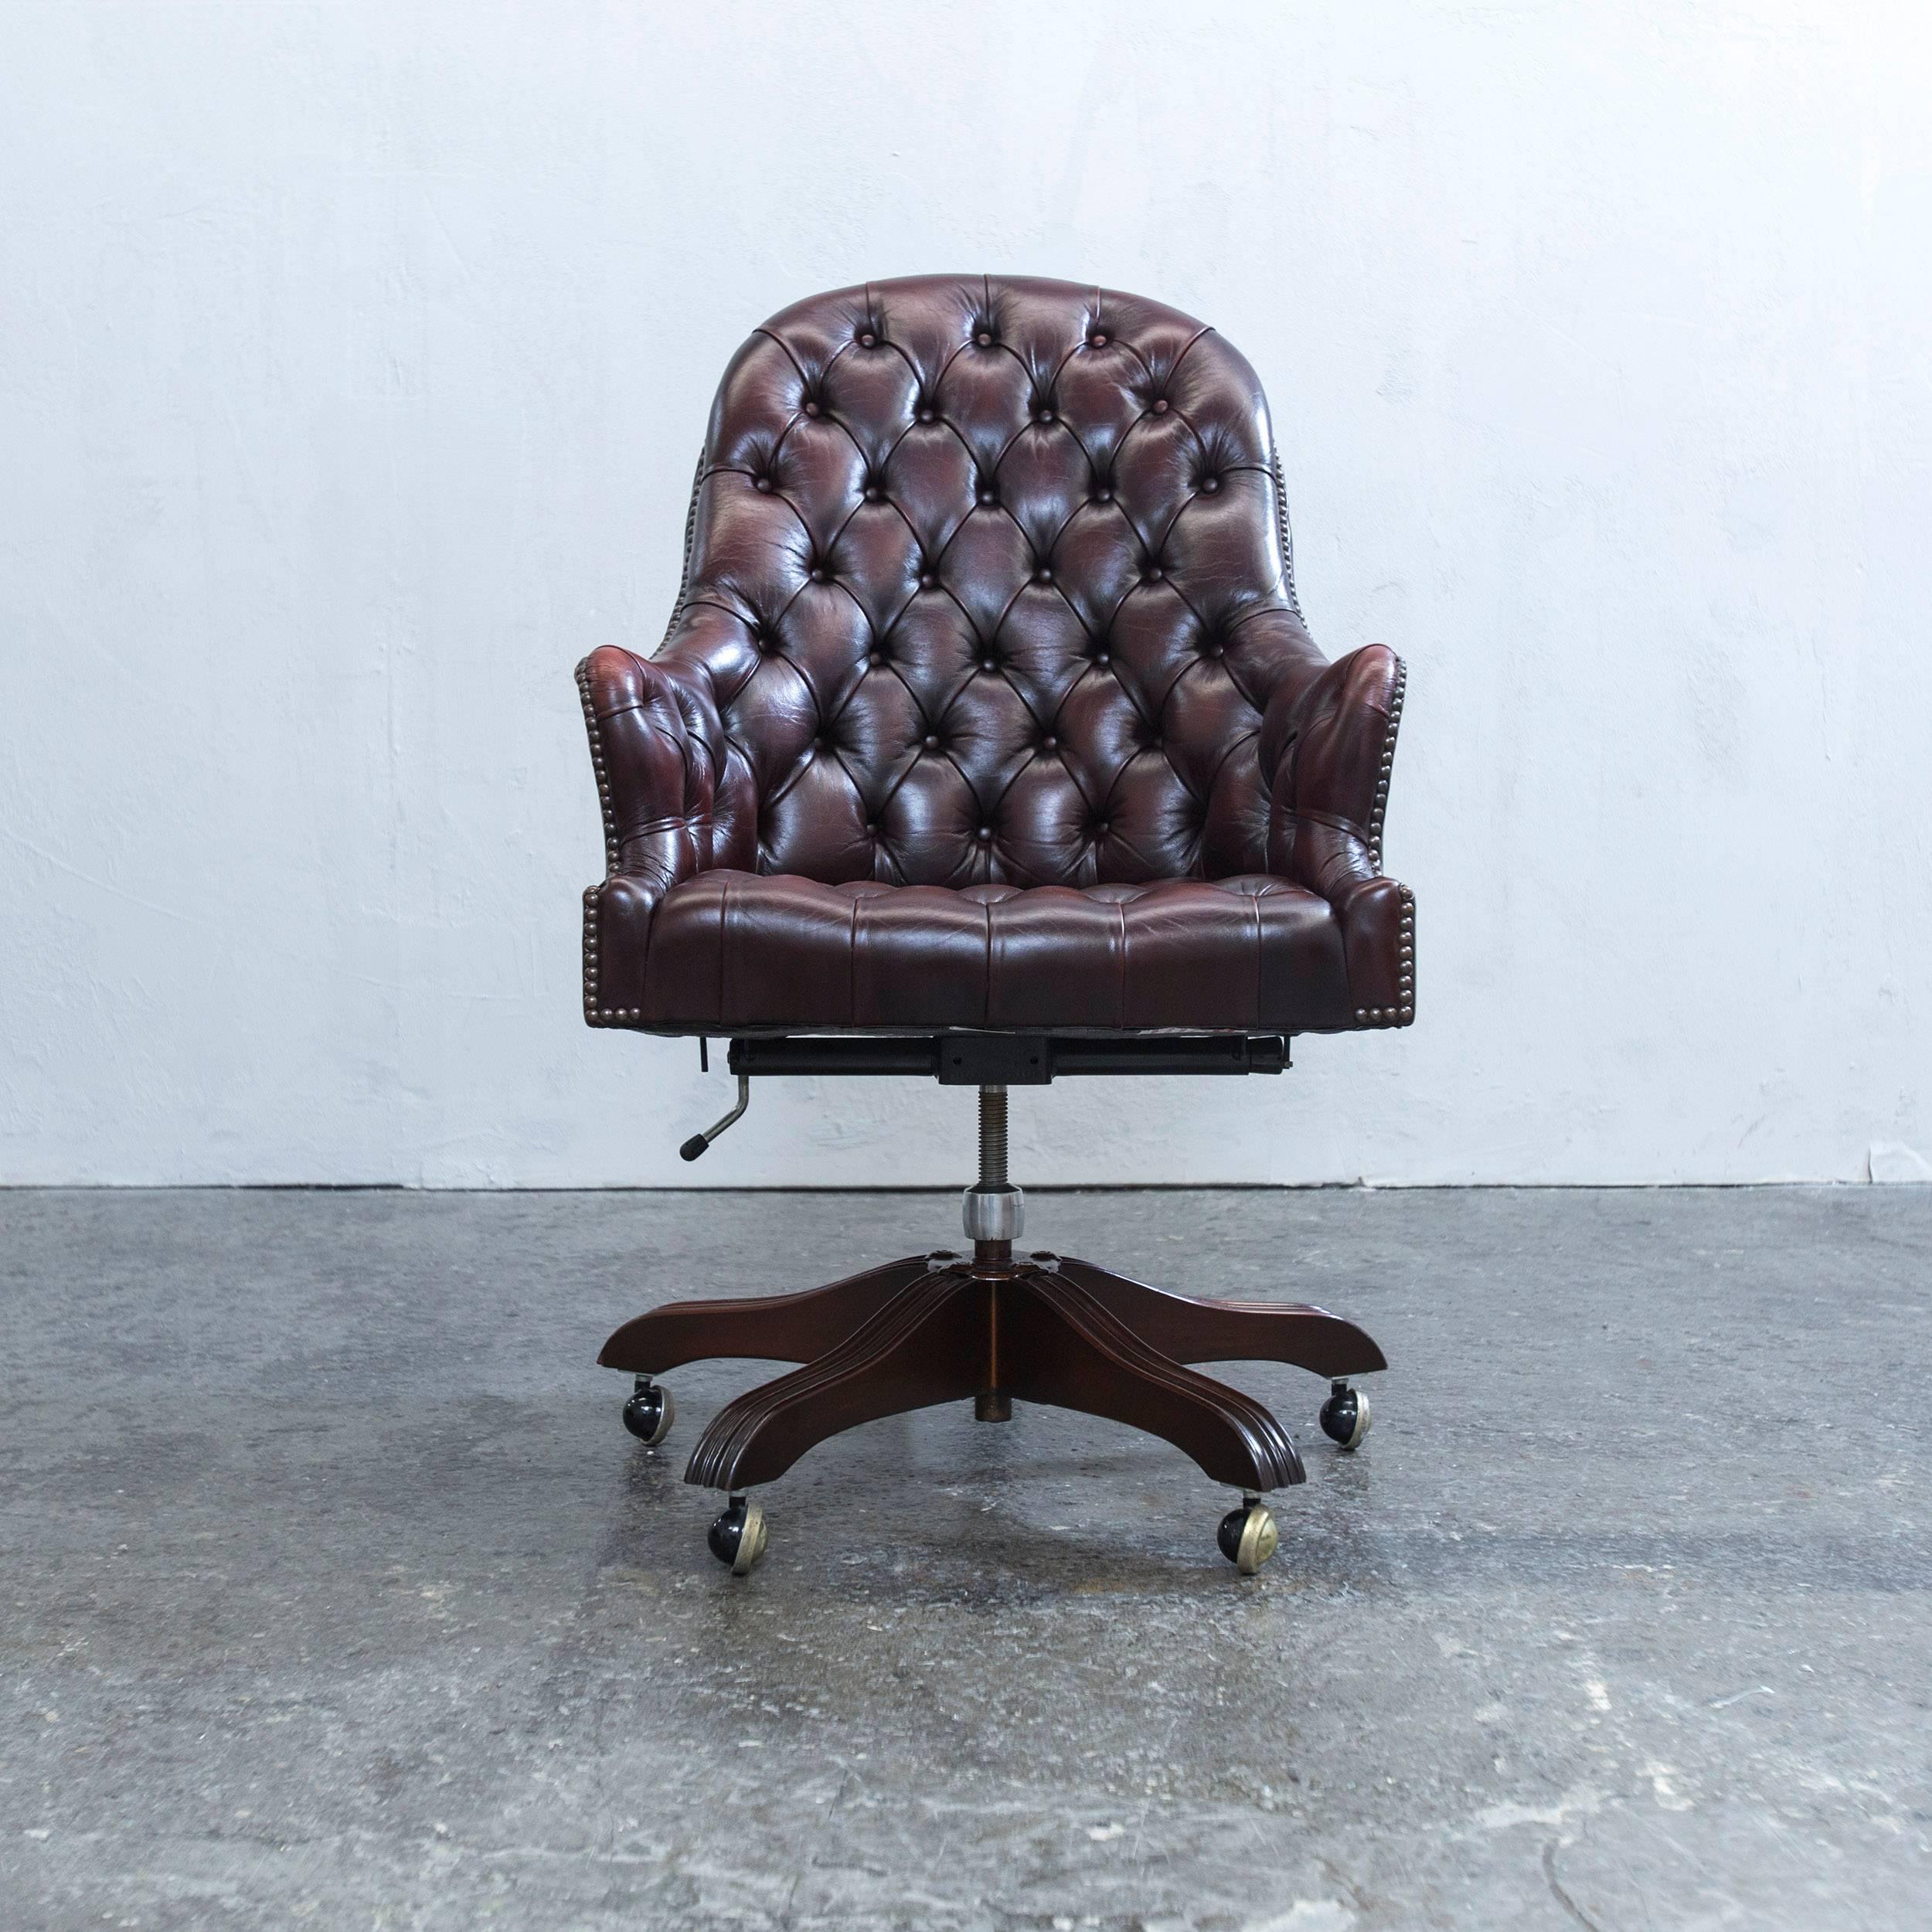 Brown colored original Wade Chesterfield leather revolving chair in an elegant design, made for pure comfort and functionality.